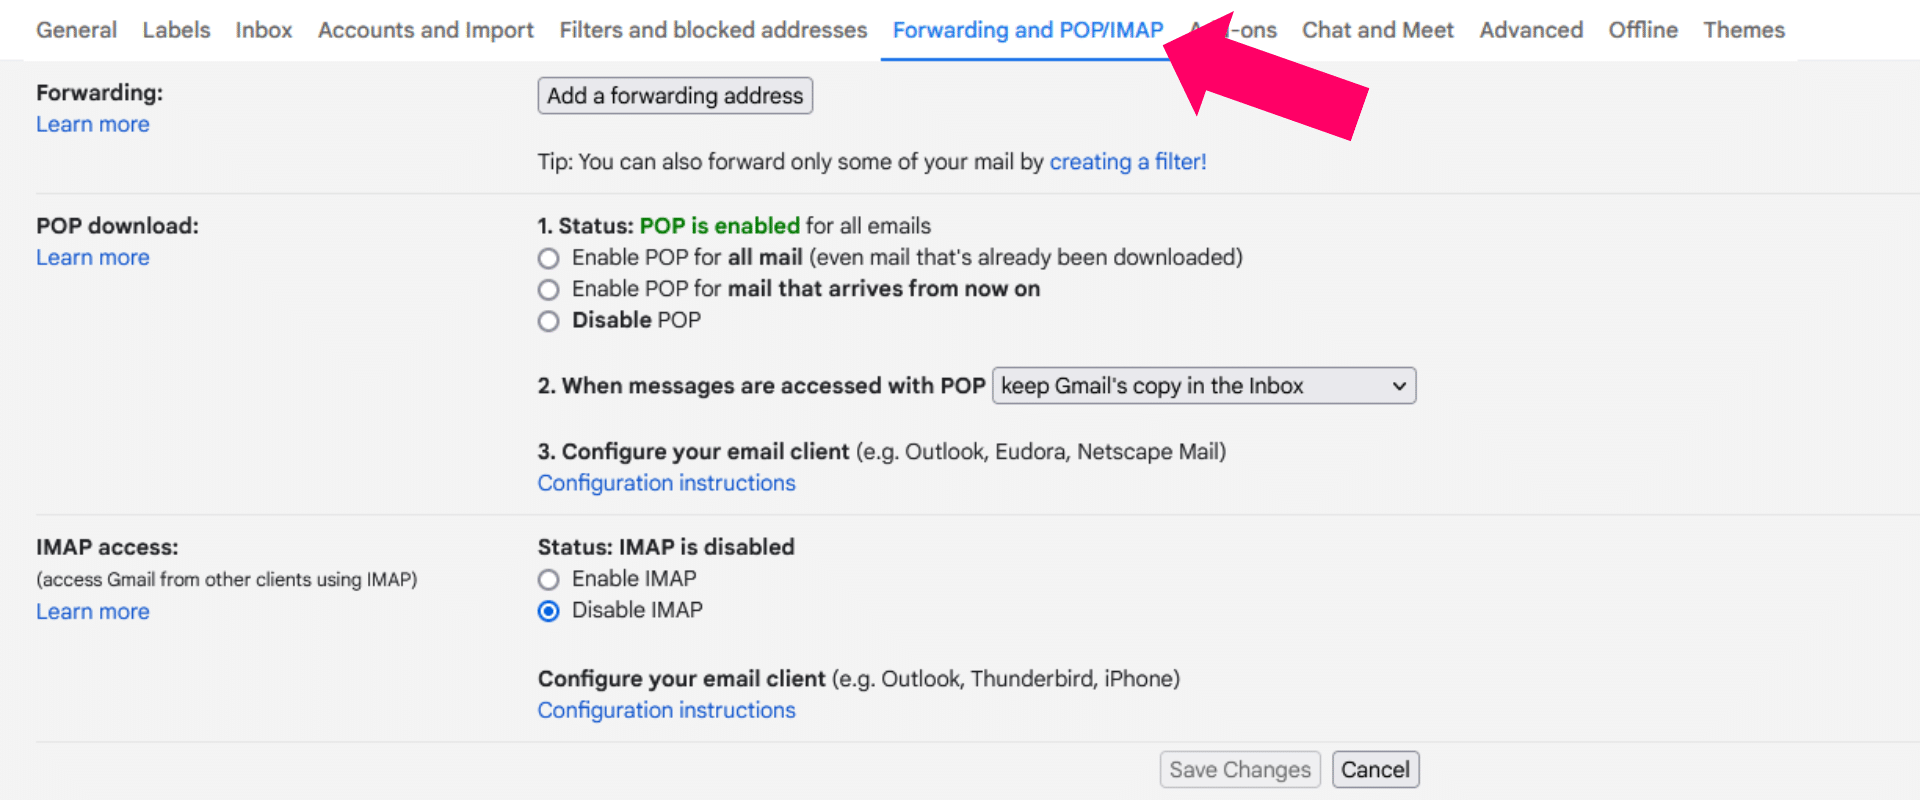 Navigate to Forwarding and POP/IMAP: Click on the 'Forwarding and POP/IMAP' tab.